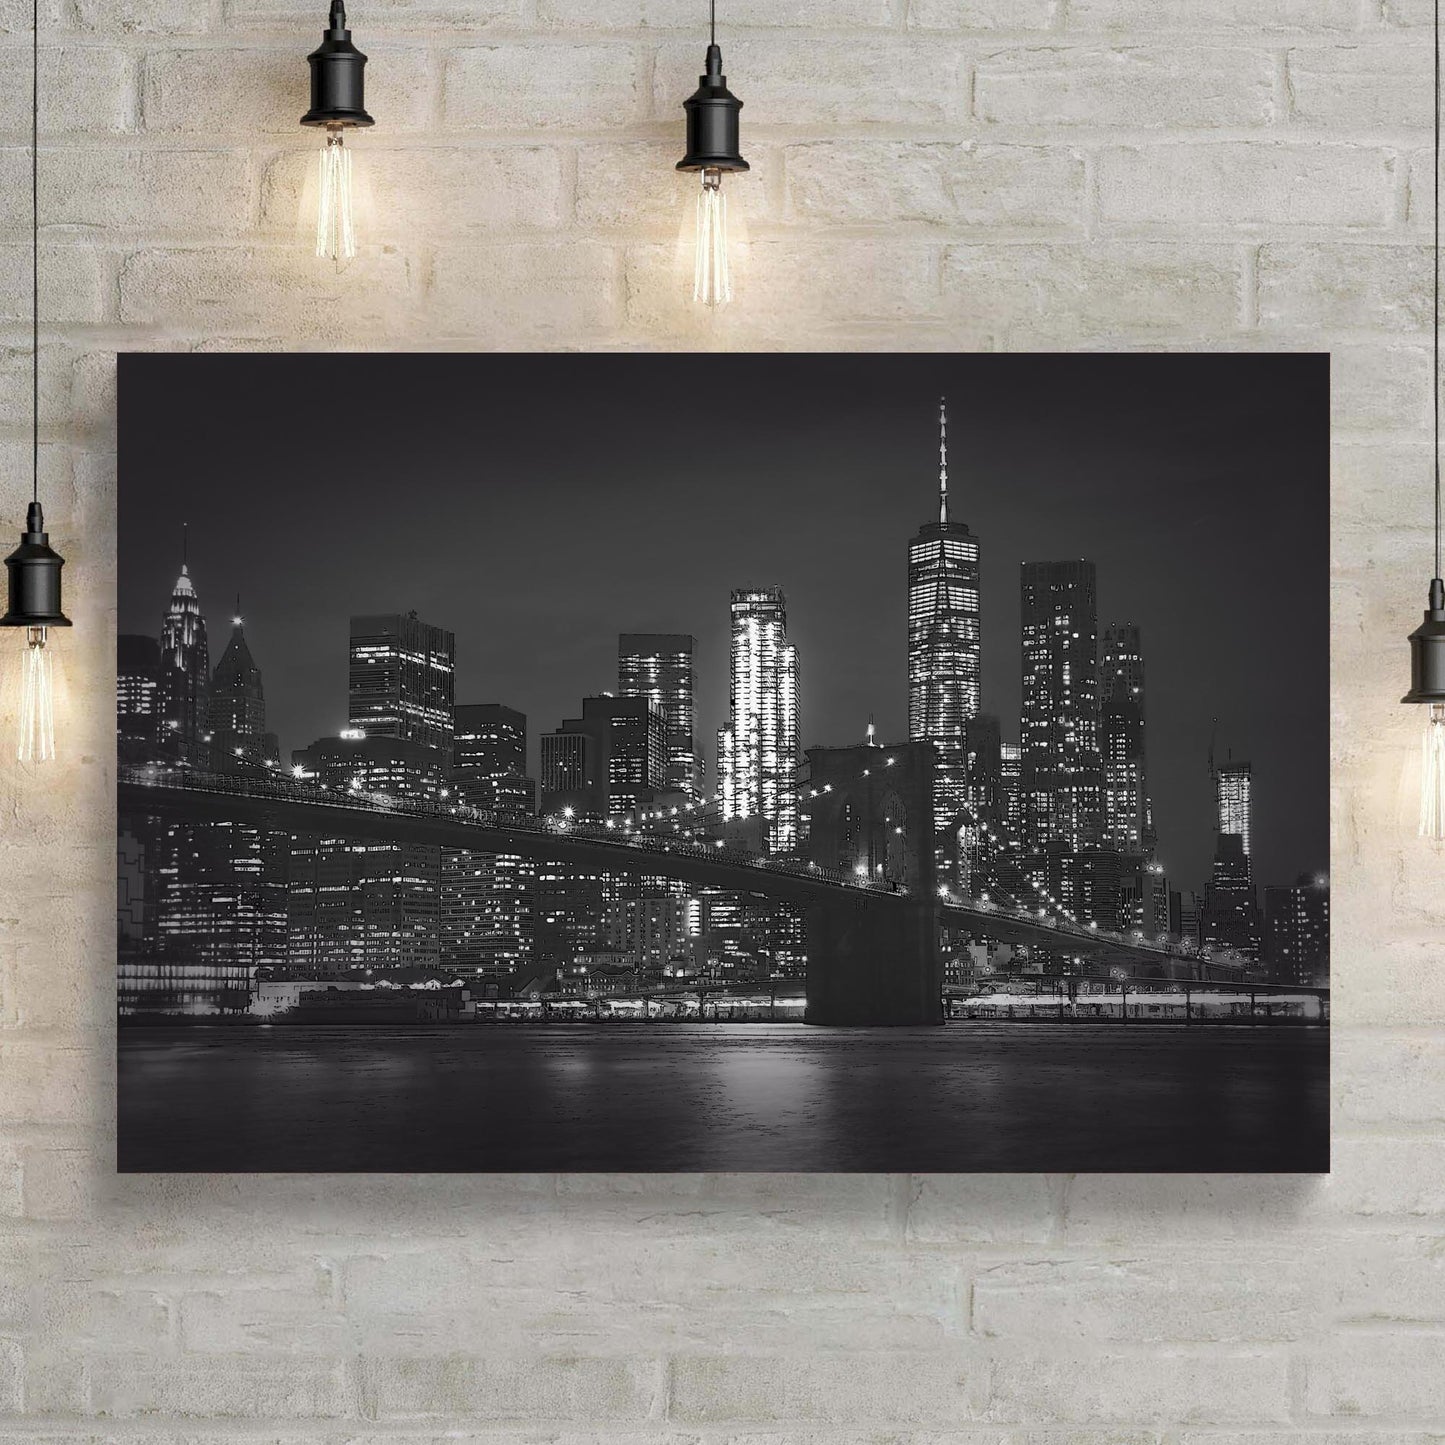 New York Black & White Canvas Wall Art - Image by Tailored Canvases